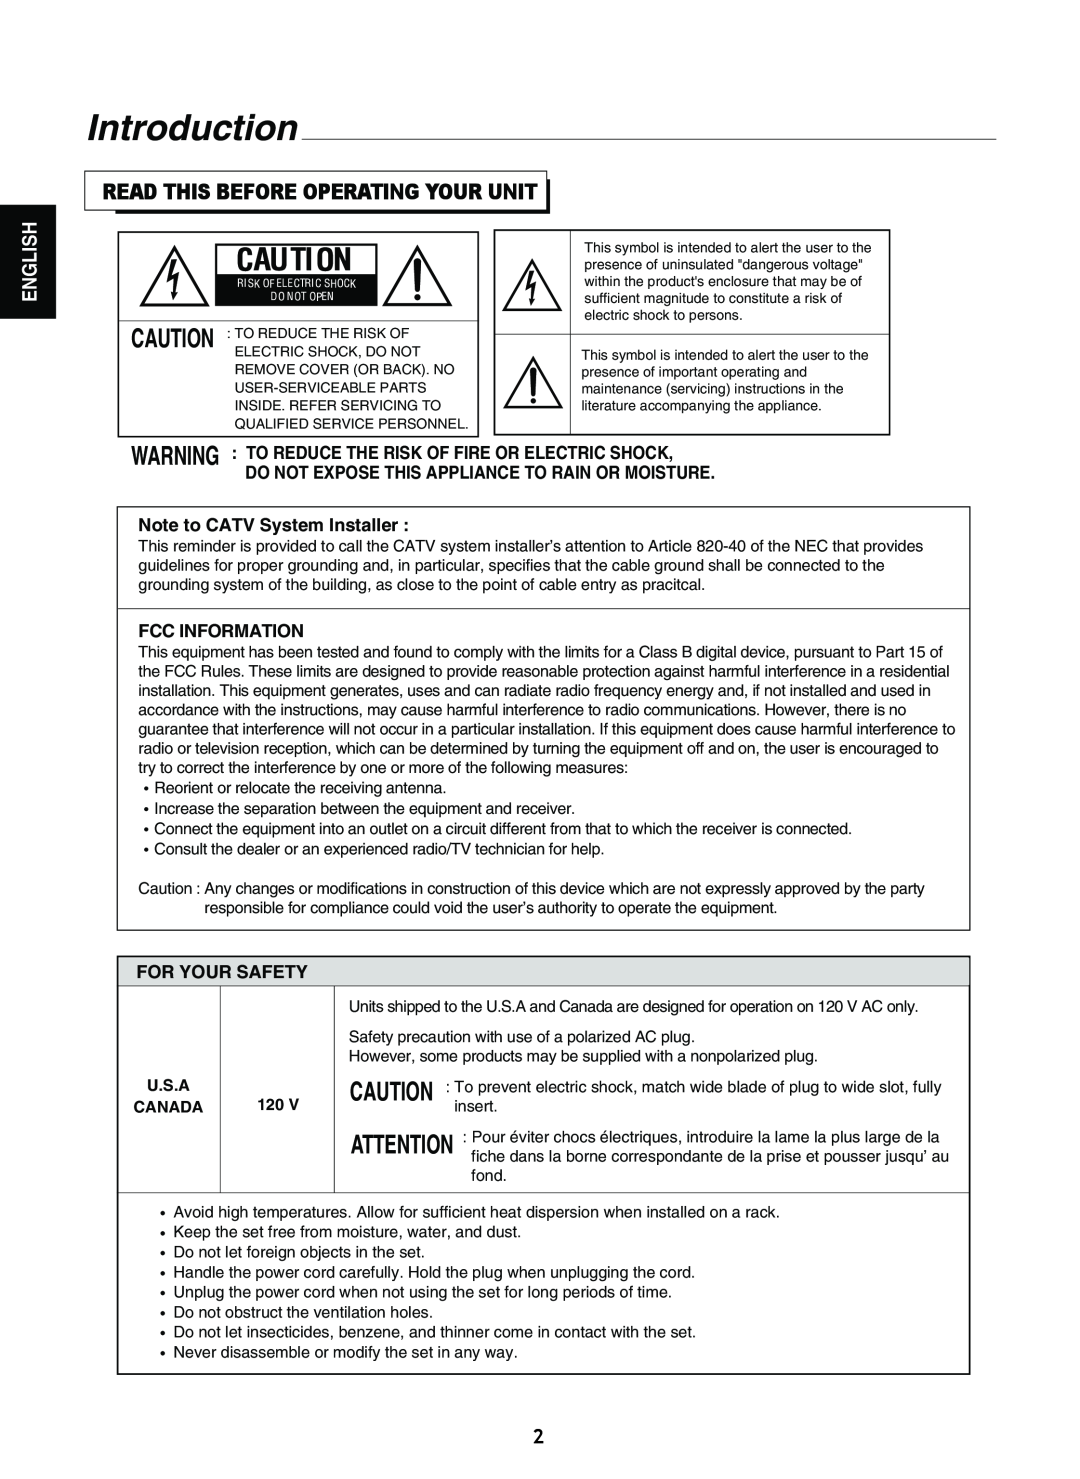 Sherwood A-965 Introduction, Read This Before Operating Your Unit, English, Note to CATV System Installer, Fcc Information 